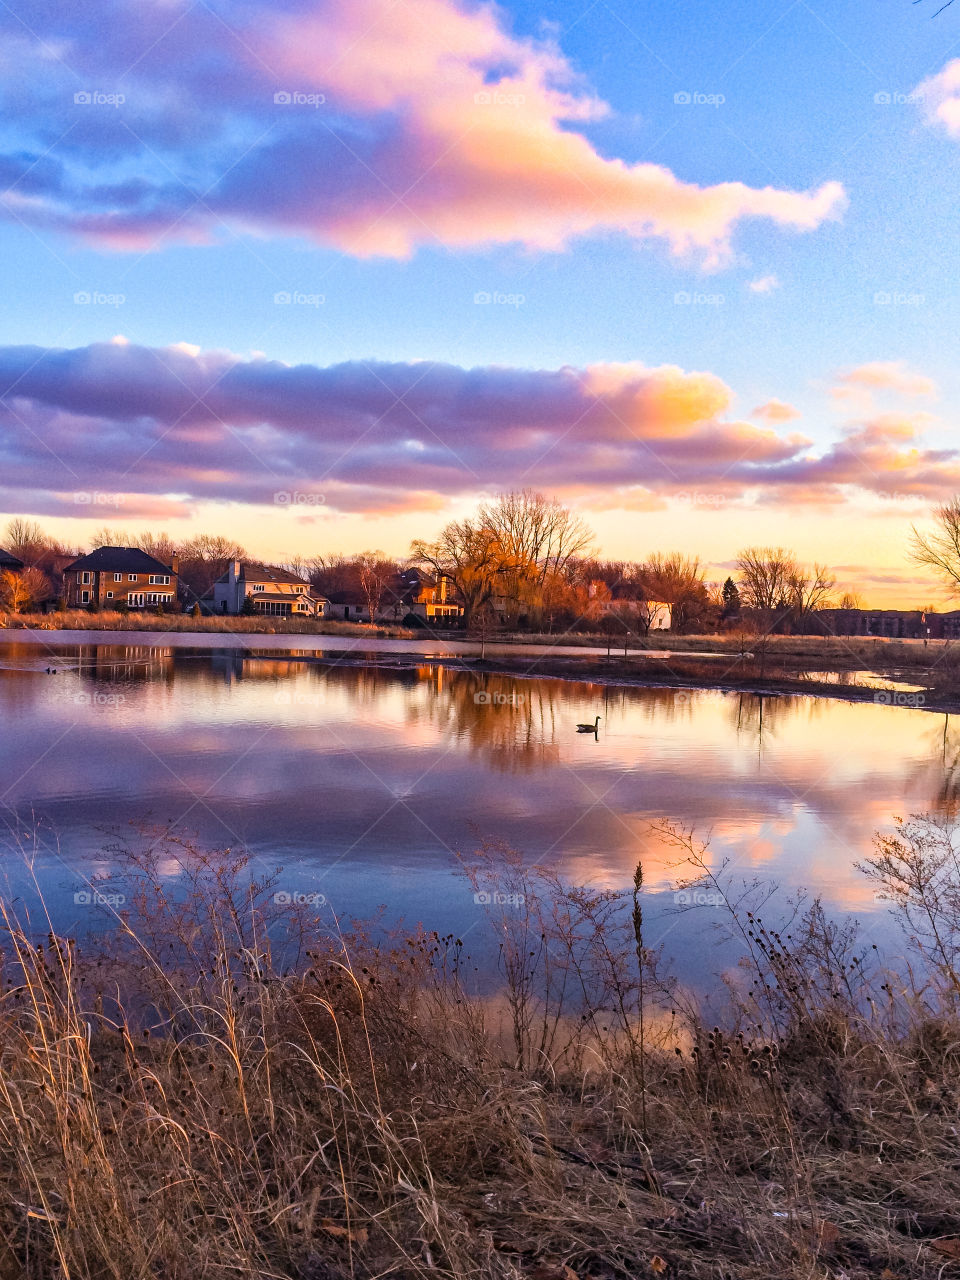 A small clear lake reflects the colorful skies above it just before the sun sets, this scenic area is home to walking trails in DuPage County, Illinois 